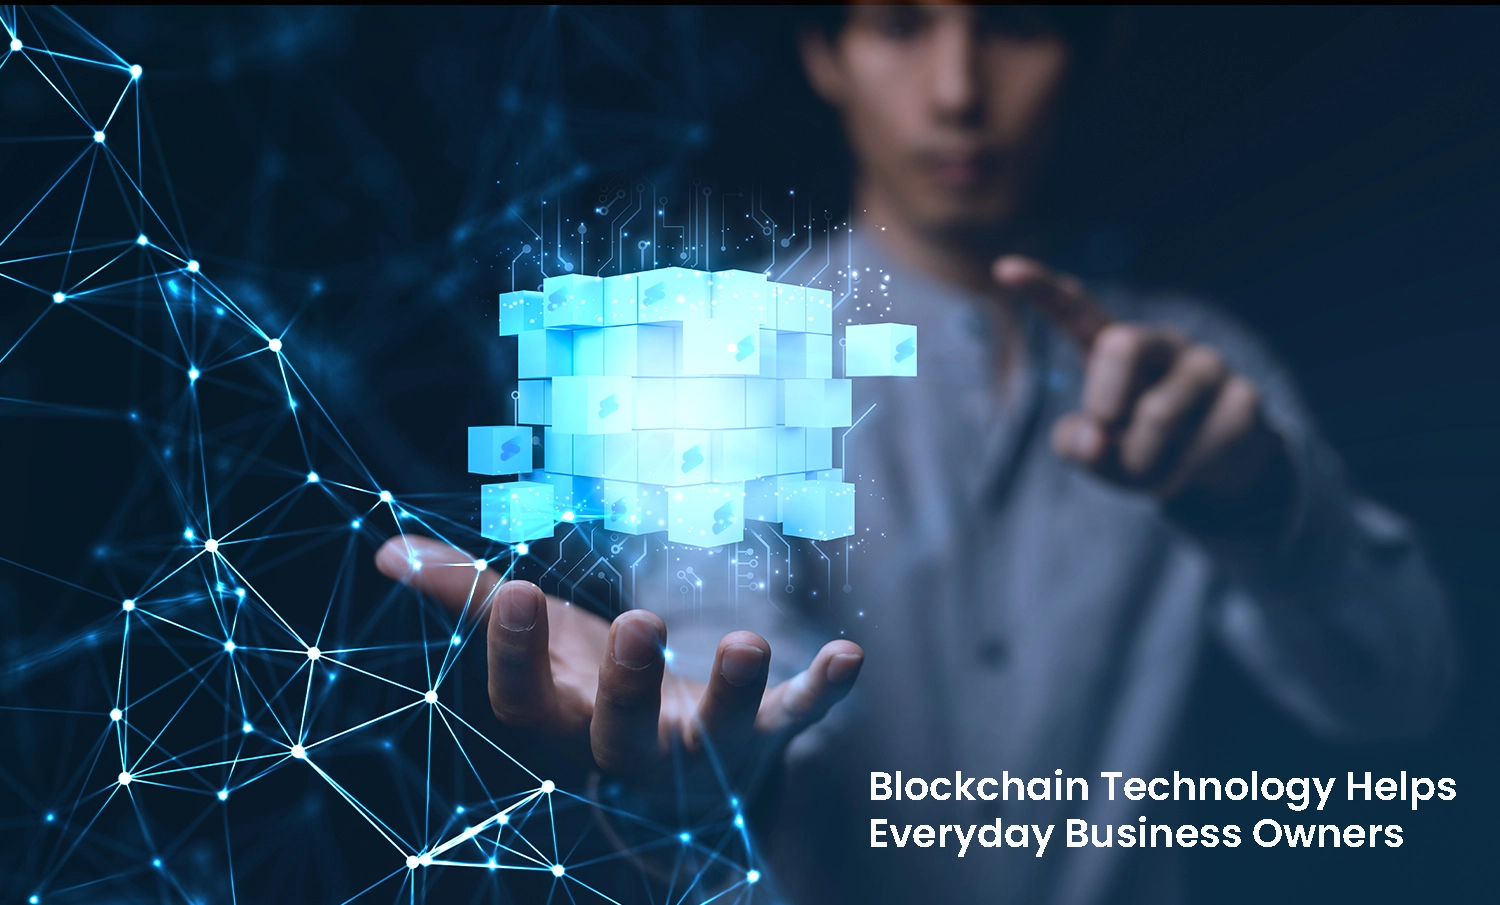 Blockchain Technology Helps Everyday Business